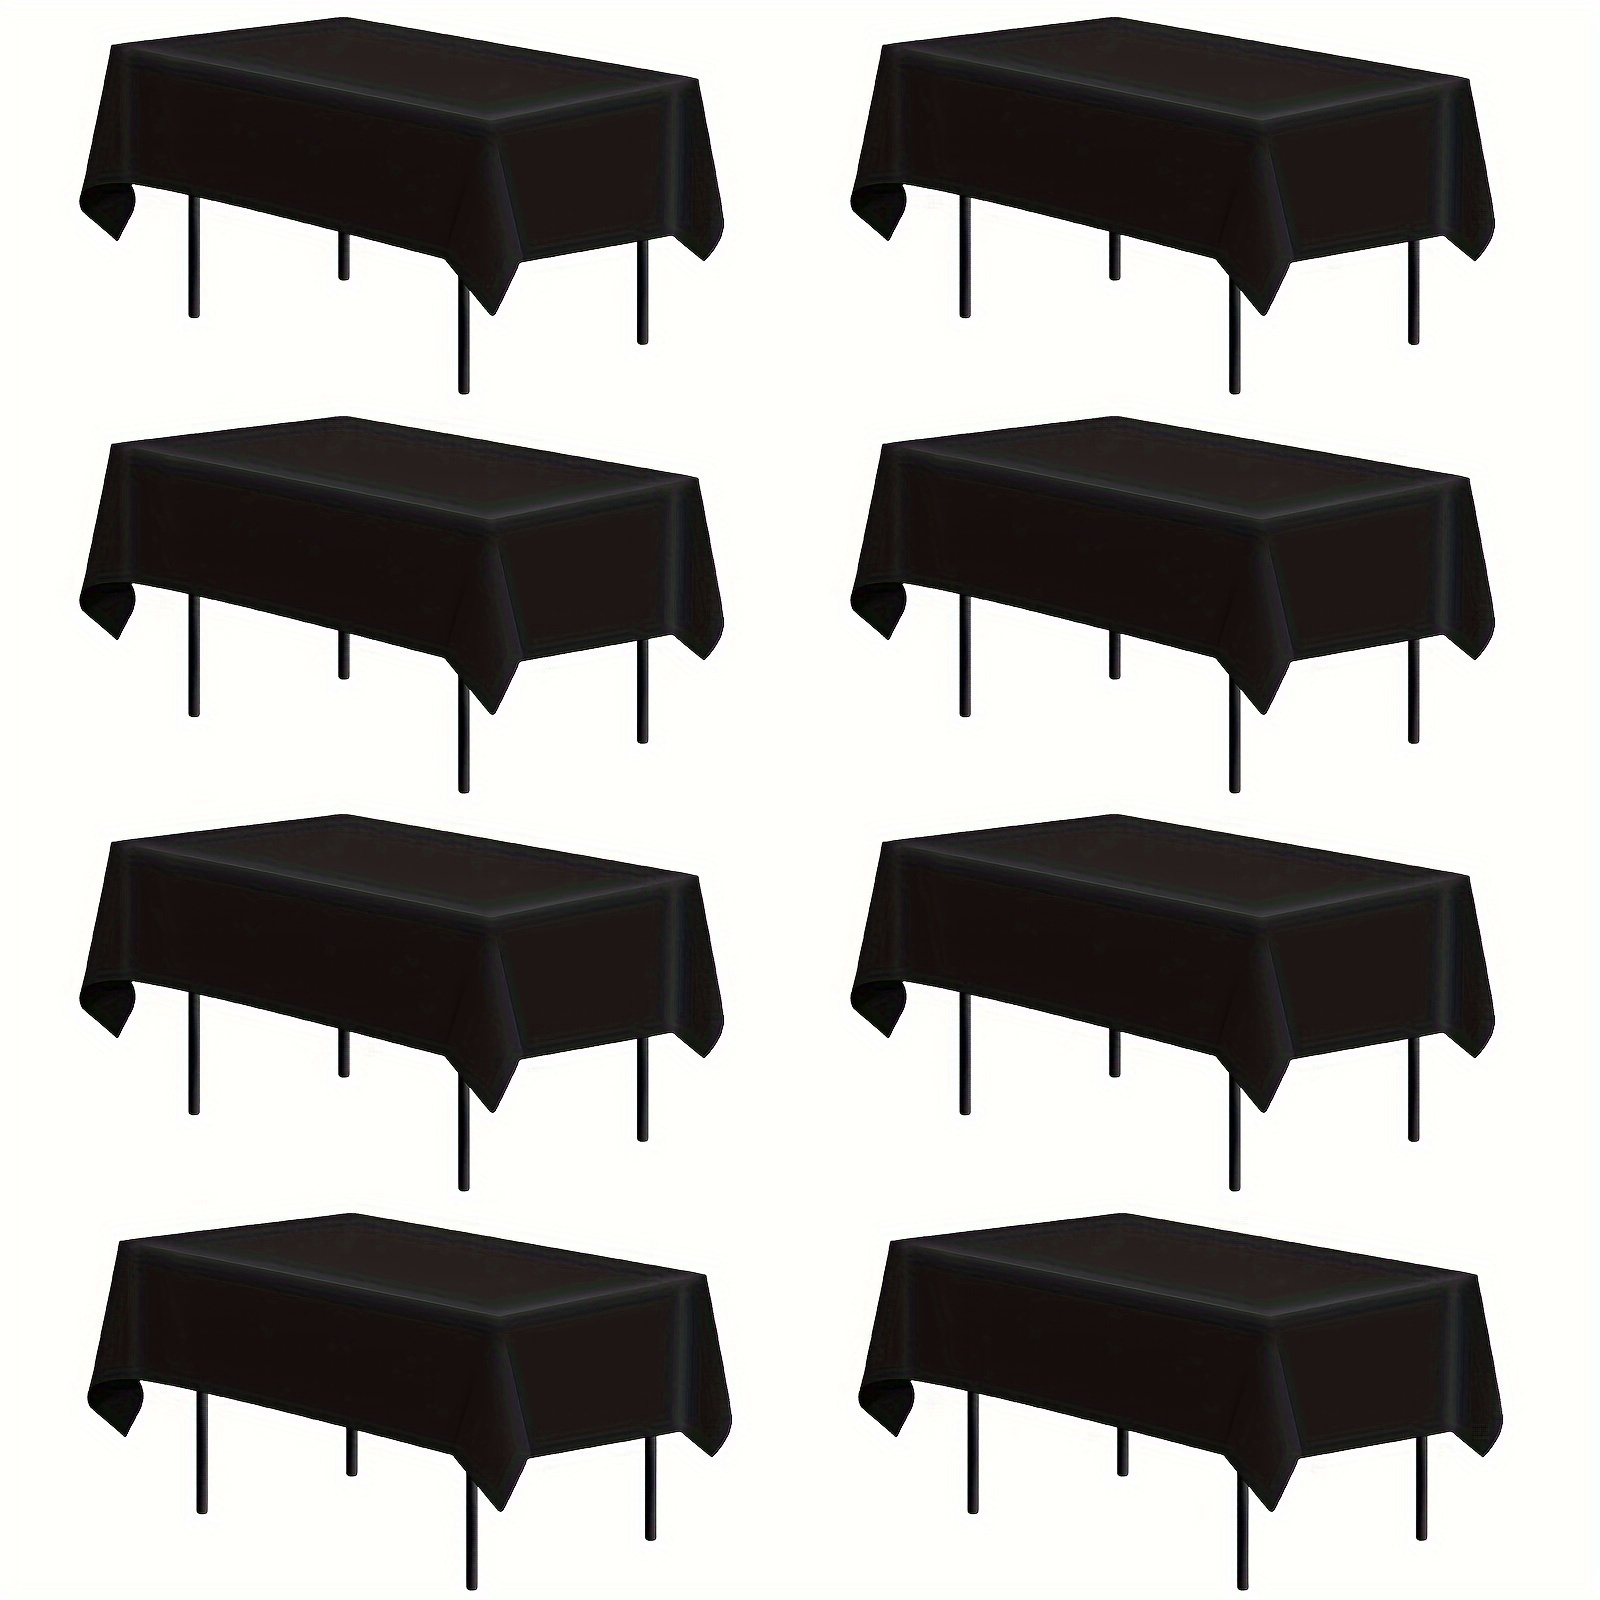 

8pcs, Black/white Tablecloth 58 X 102 Inch, Rectangle Stain And Wrinkle Resistant Washable Polyester Table Cover For Dining Table, Wedding, Buffet Parties And Camping